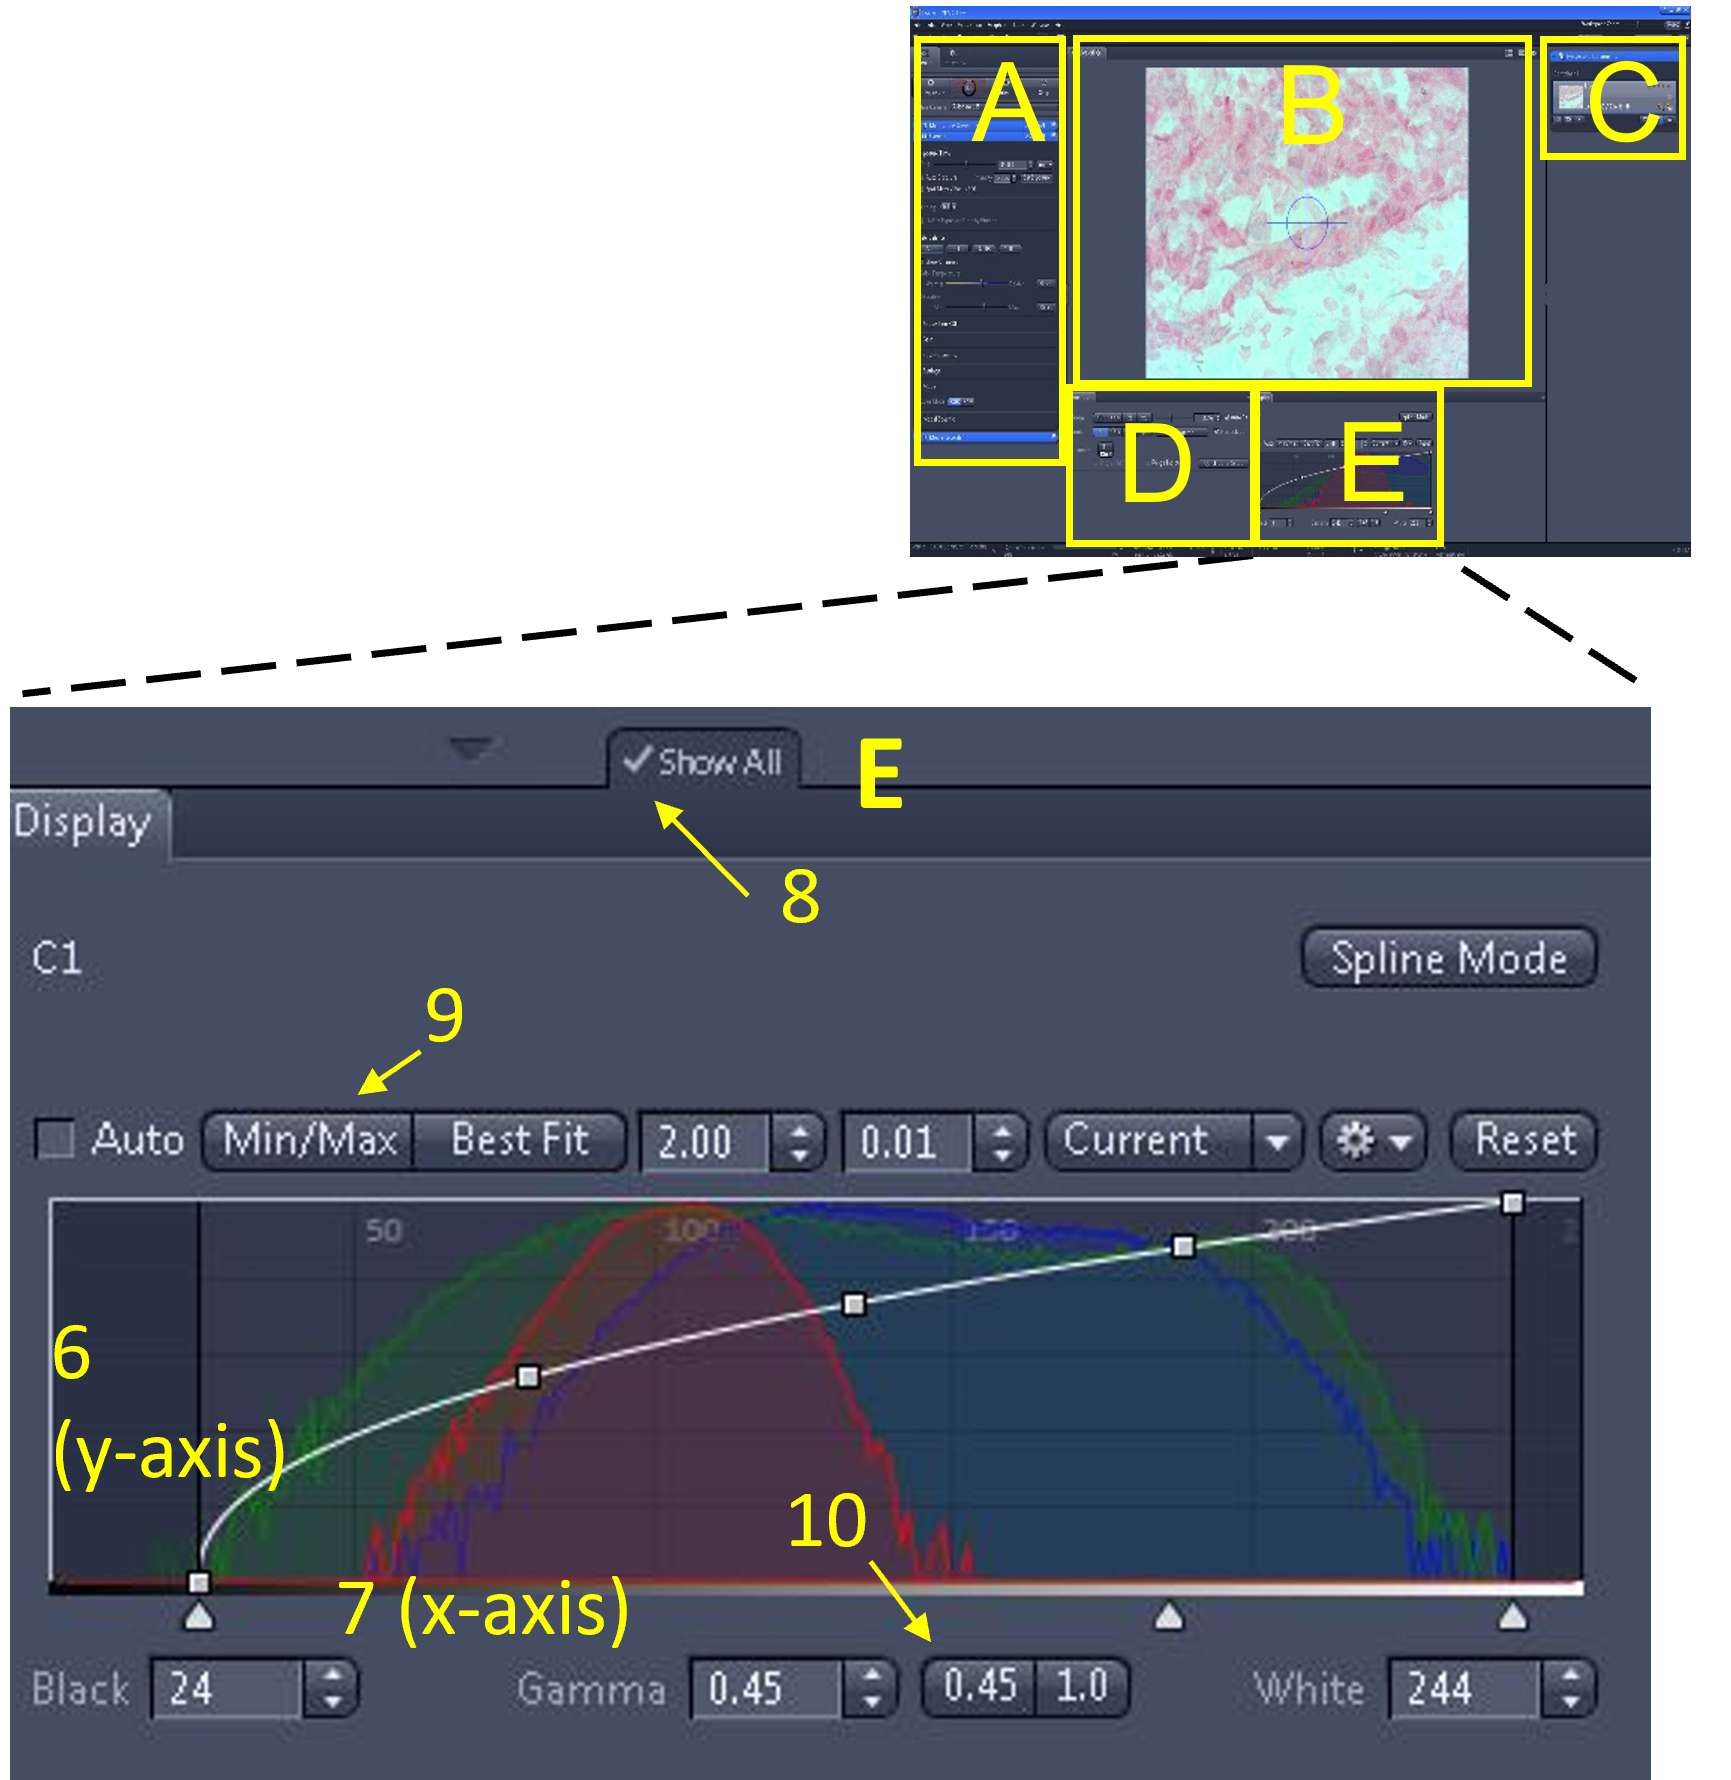 An image of the display settings area and the histograms indicating pixel tone distribution.